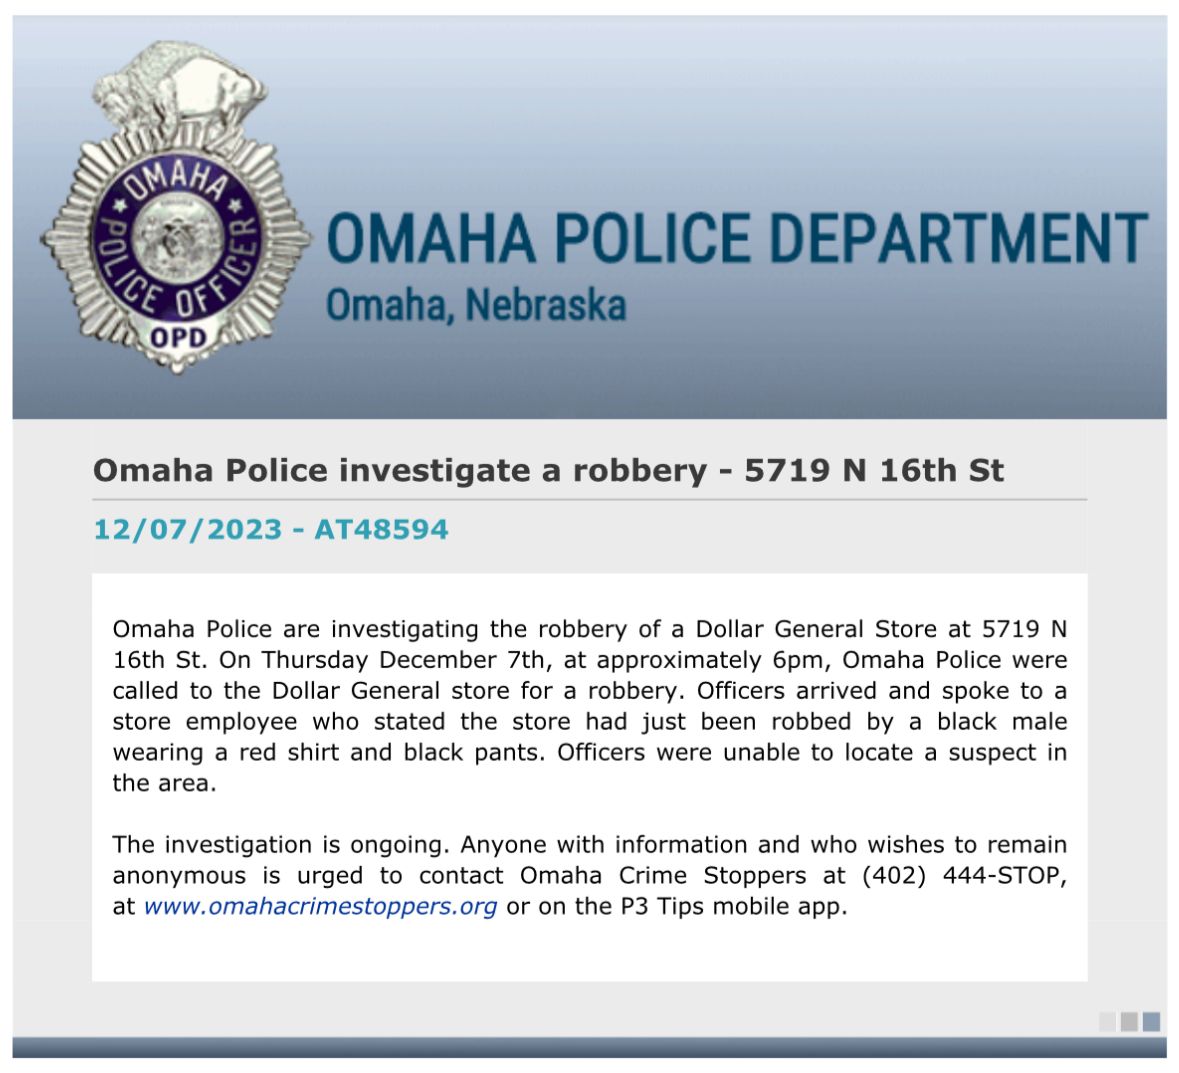 .@OmahaPolice investigating a robbery at 5719 N 16th Street, Dollar General that occurred yesterday around 6pm. Police spoke to an employee who stated the store was robbed by a black male wearing a red shirt and black pants.